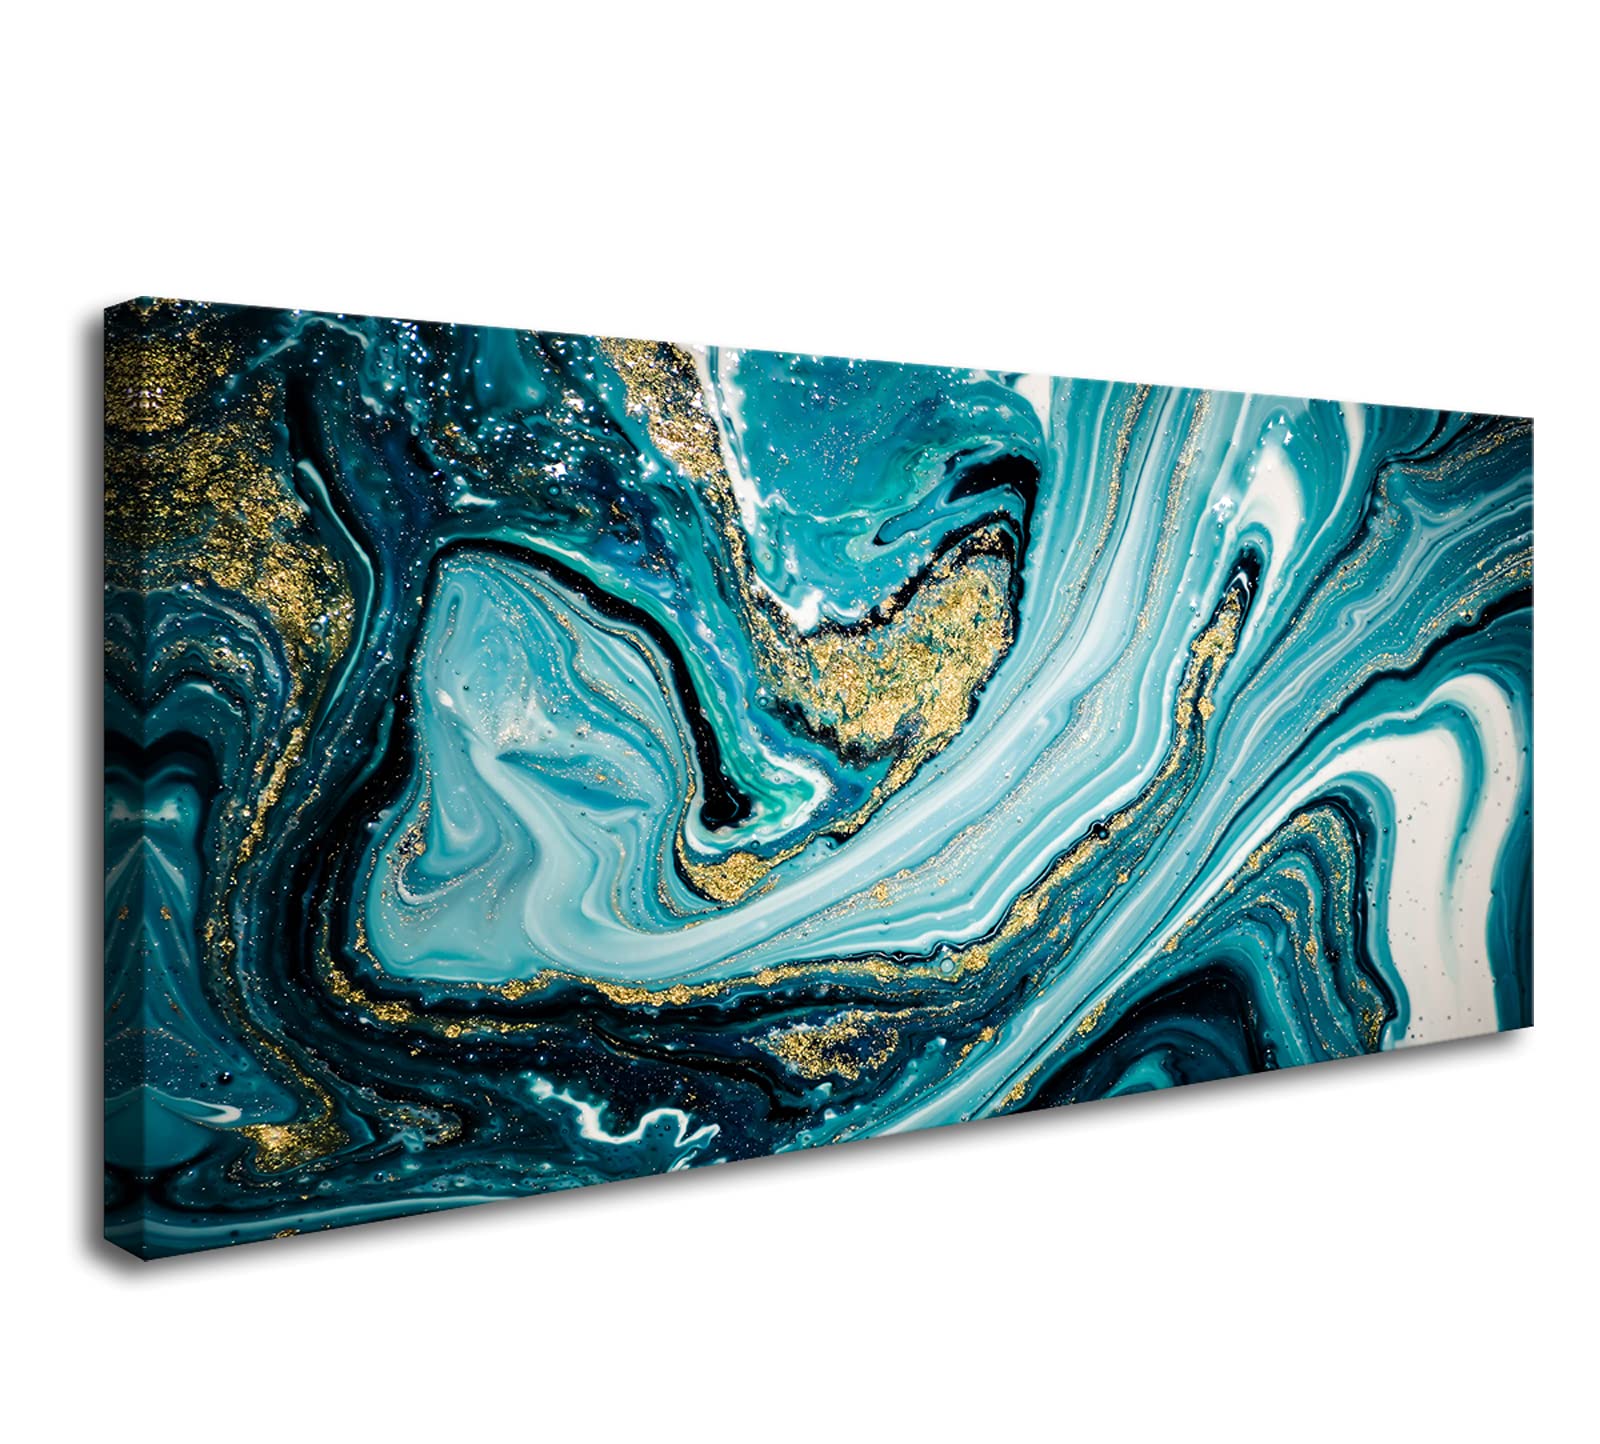 XXMWallArt FC2750 Abstract Texture Wall Art Marble Vortex Canvas Prints Painting for Living Room Bedroom Kitchen Home and Office Wall DecorWall Dec...